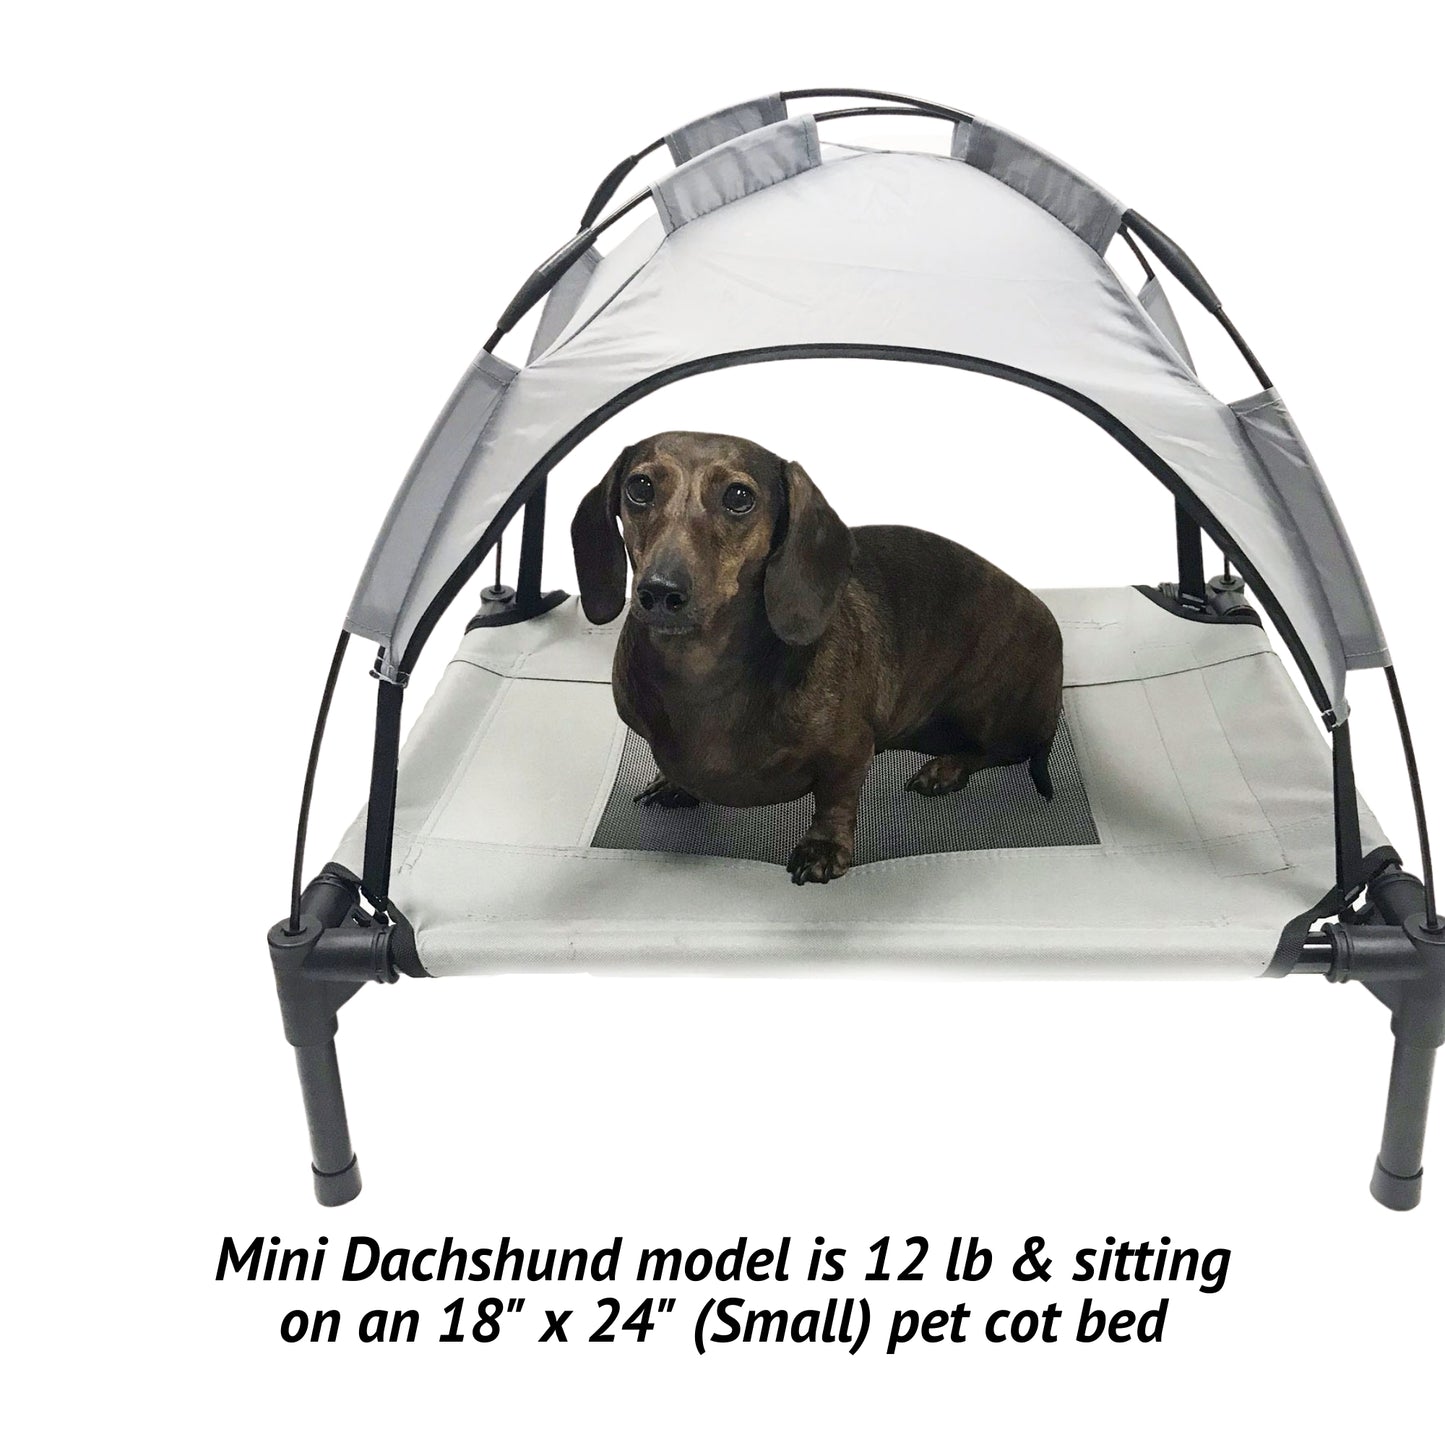 Midlee Grey Dog Cot with Canopy Elevated Pet Bed